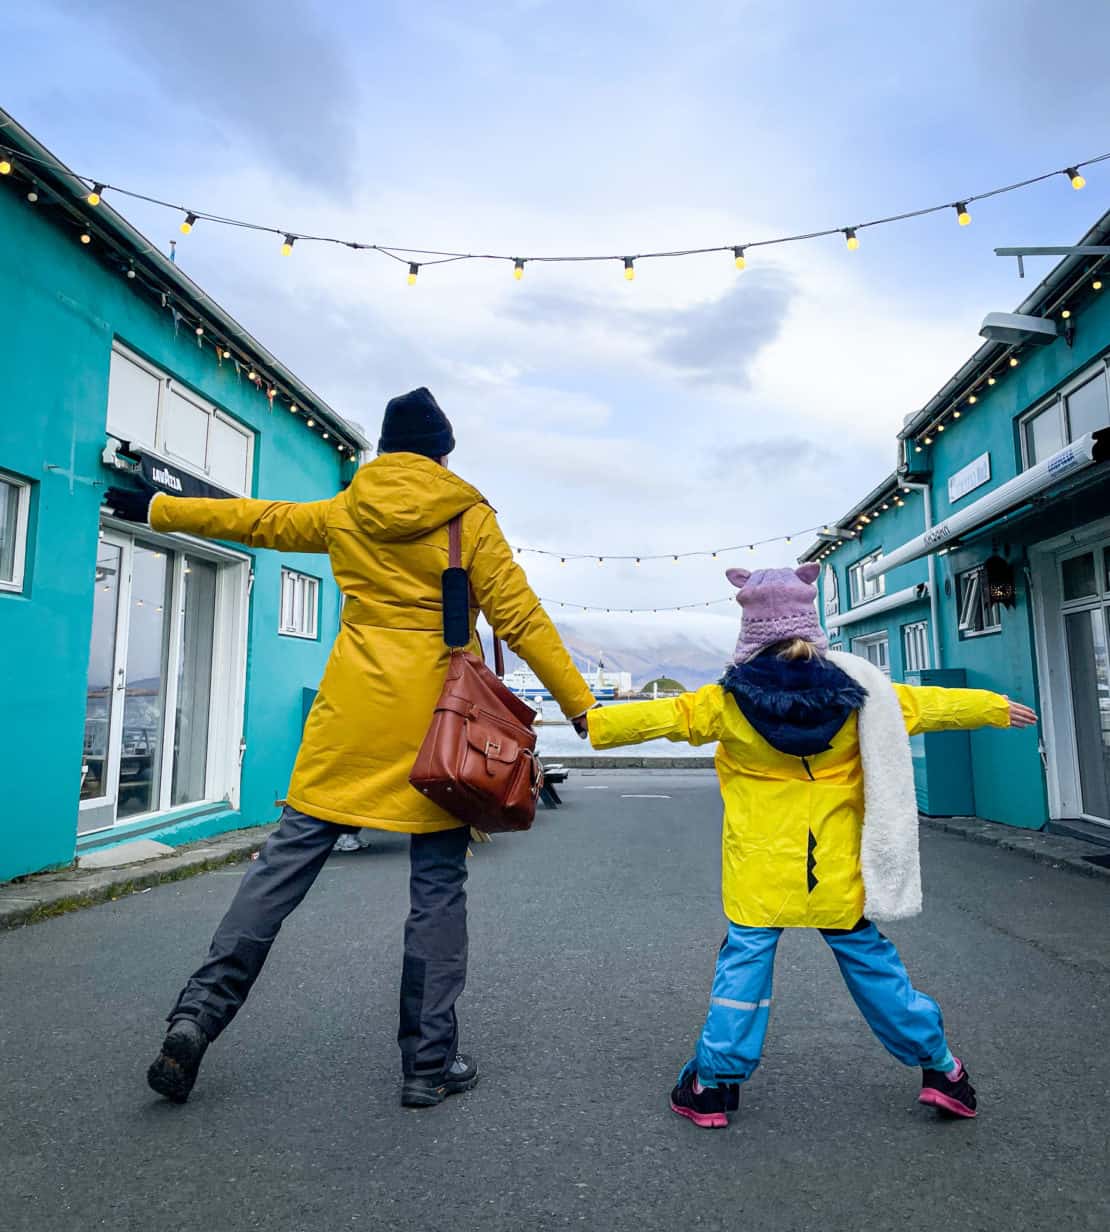 Mother and daughter playing on the street of Reykjavik - enjoying travel to Iceland with kids